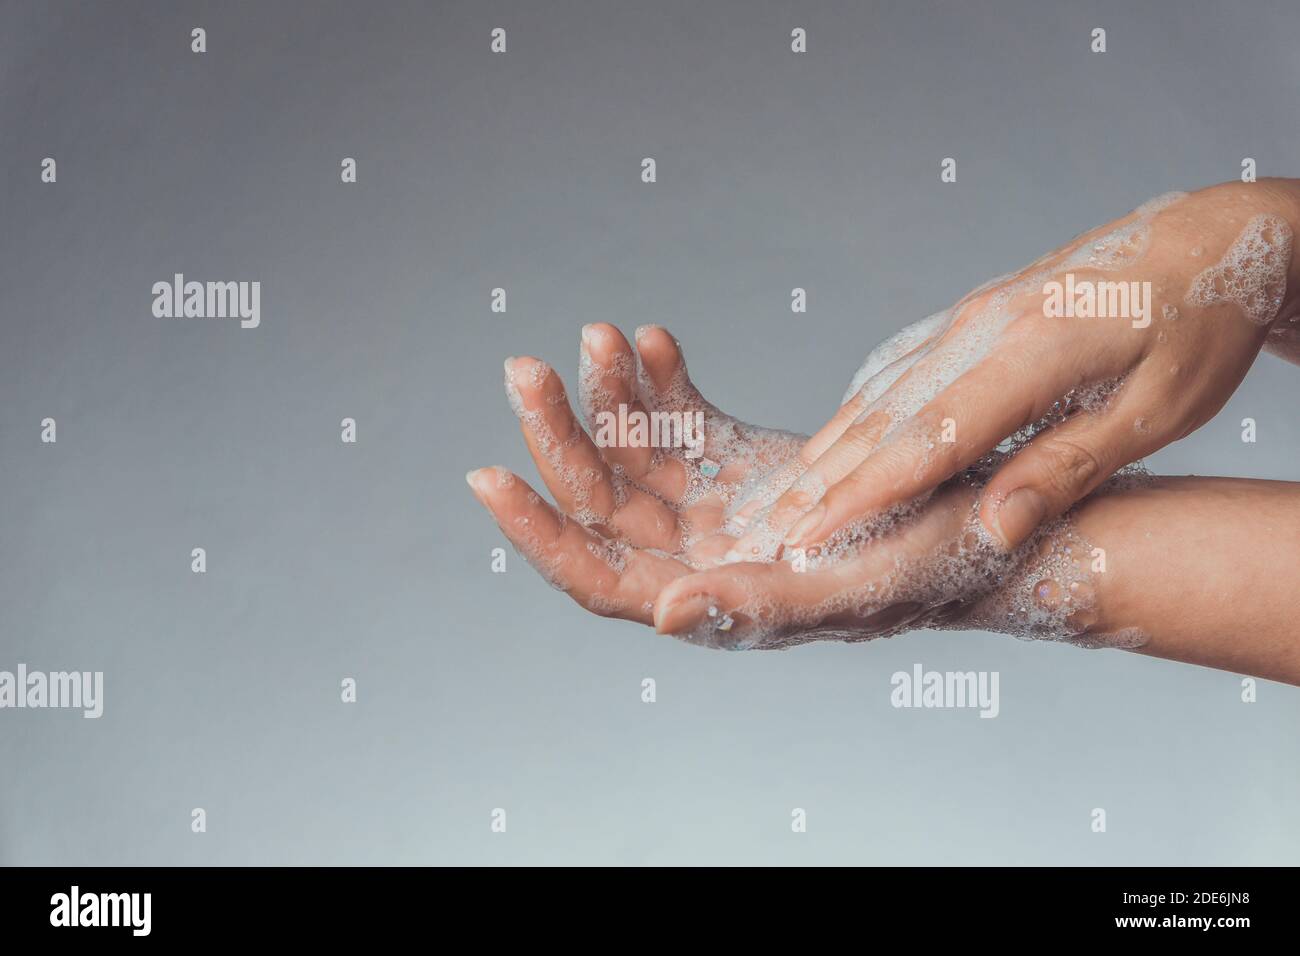 Woman washing and rubbing hands with soap for corona virus prevention; hygiene to stop spreading coronavirus. Stock Photo